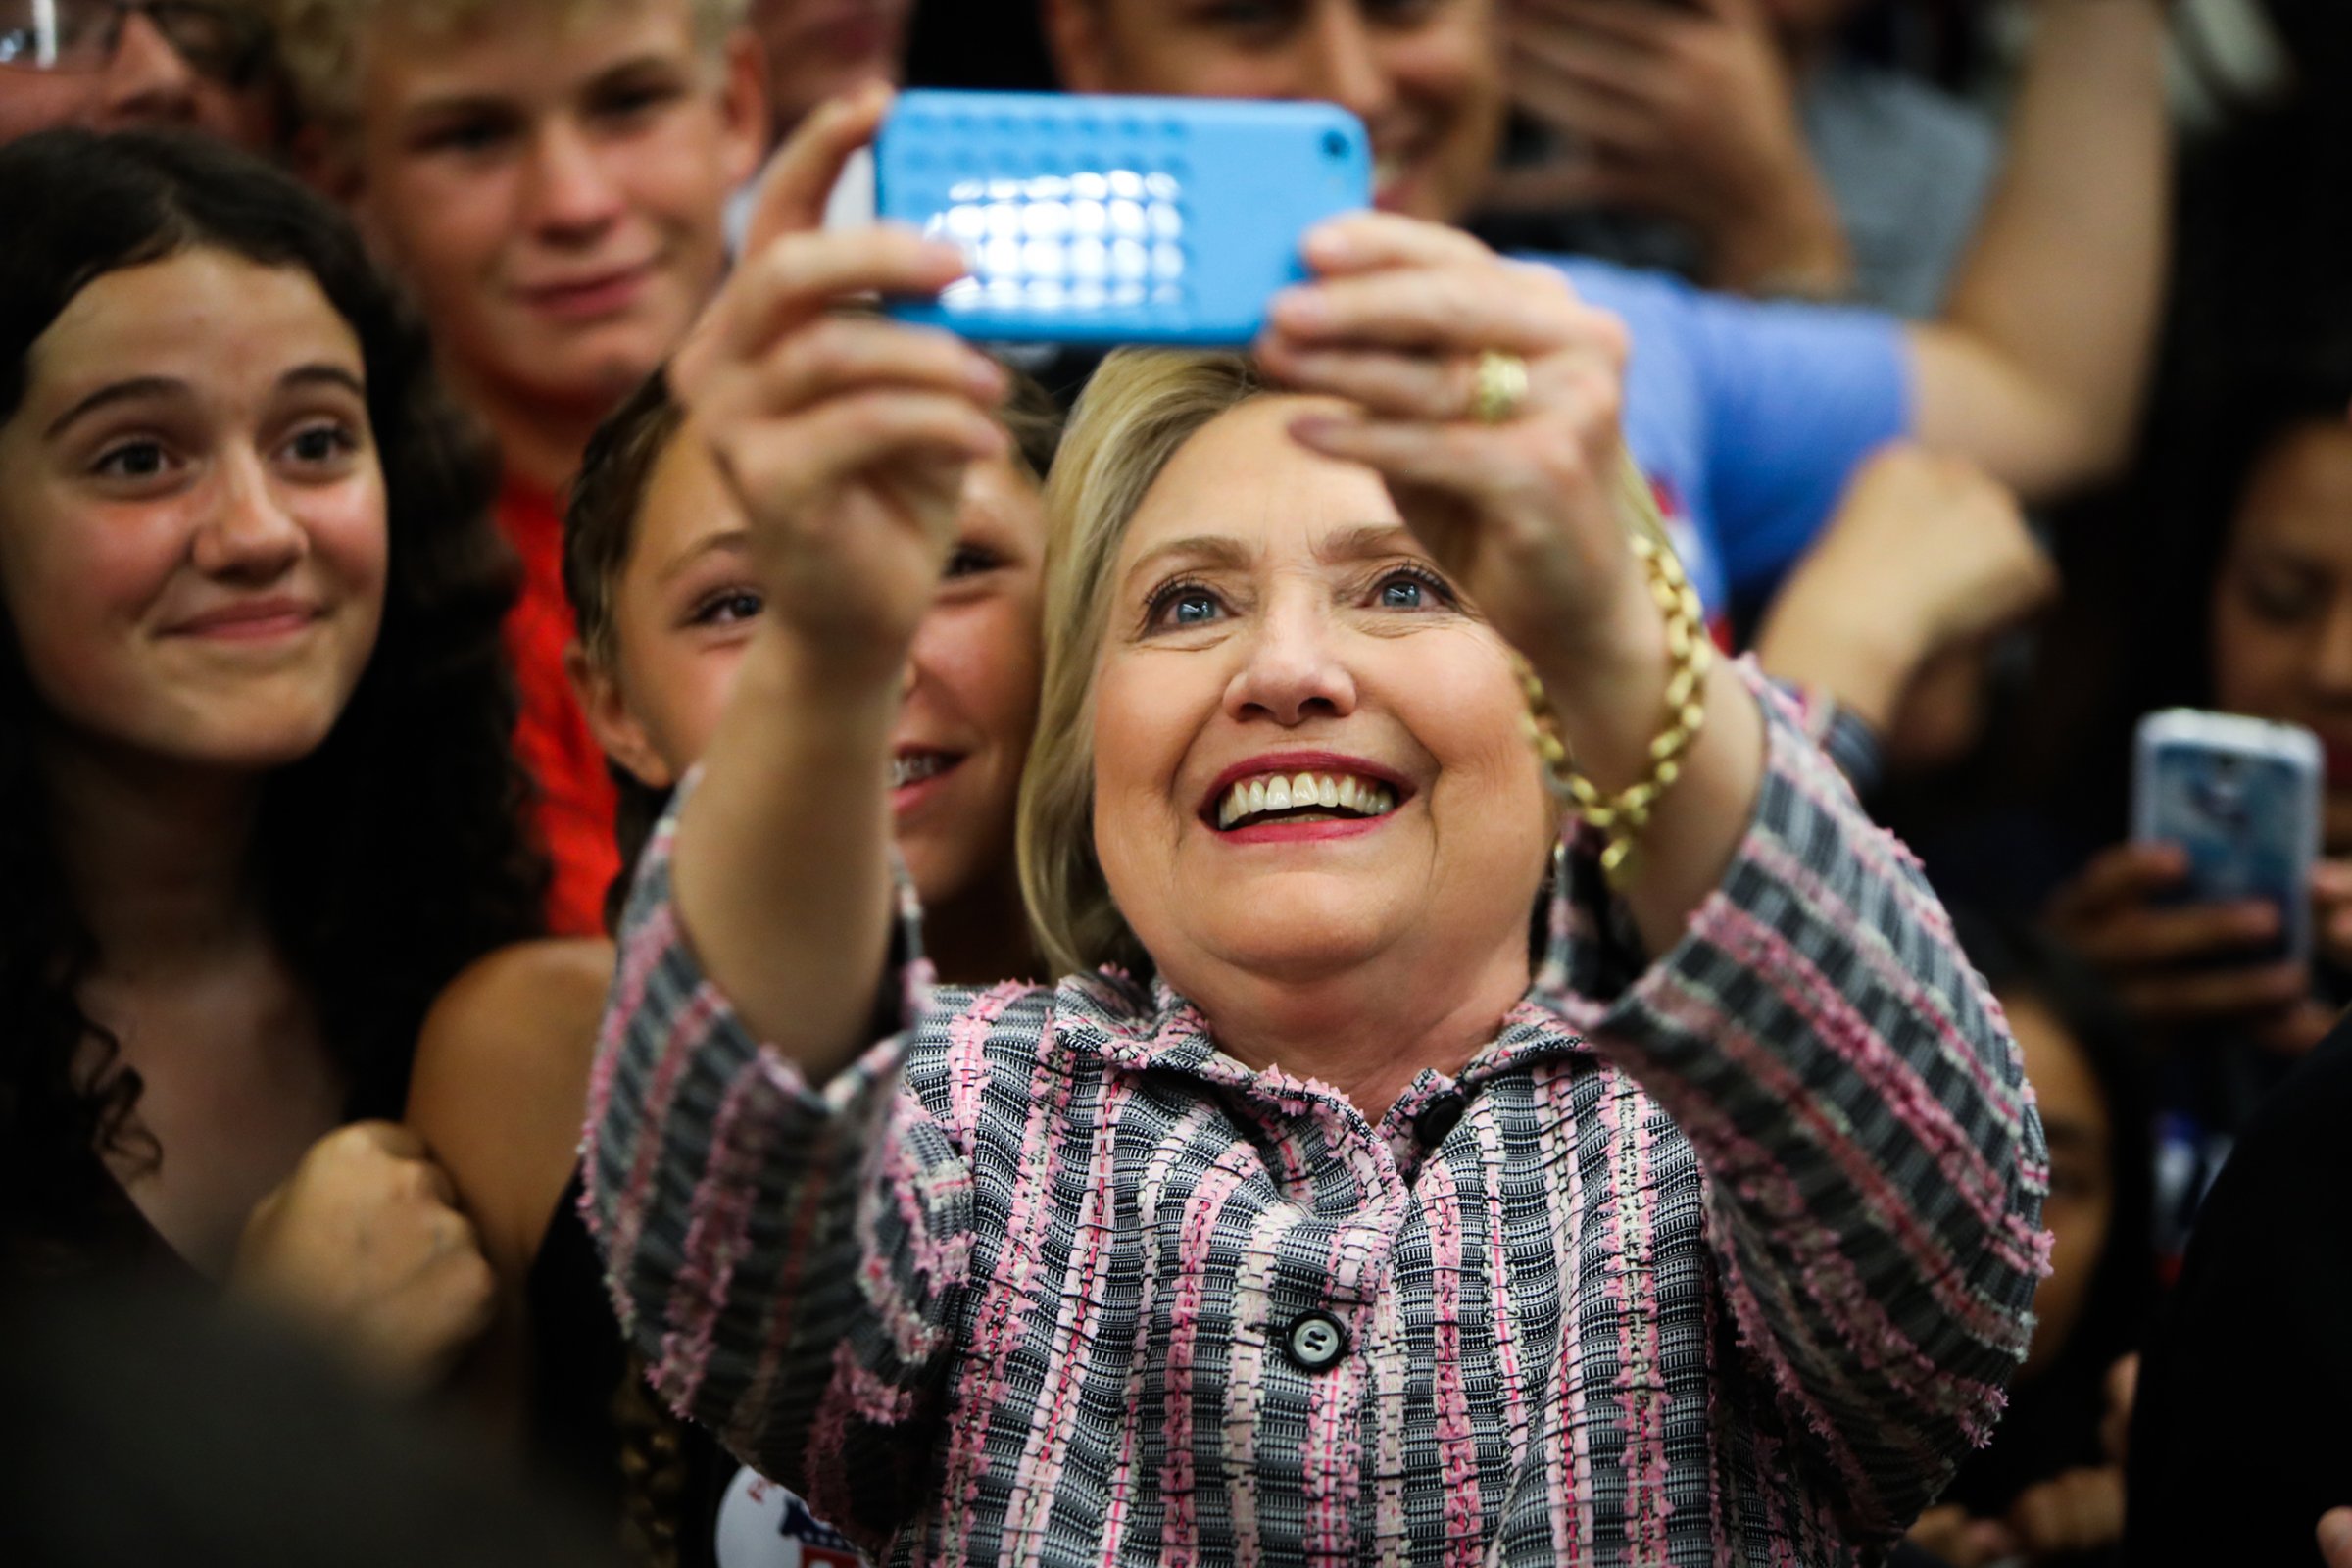 Hillary Clinton takes photographs with supporters after a campaign rally at Sacramento City College in Calif. on June 5, 2016.